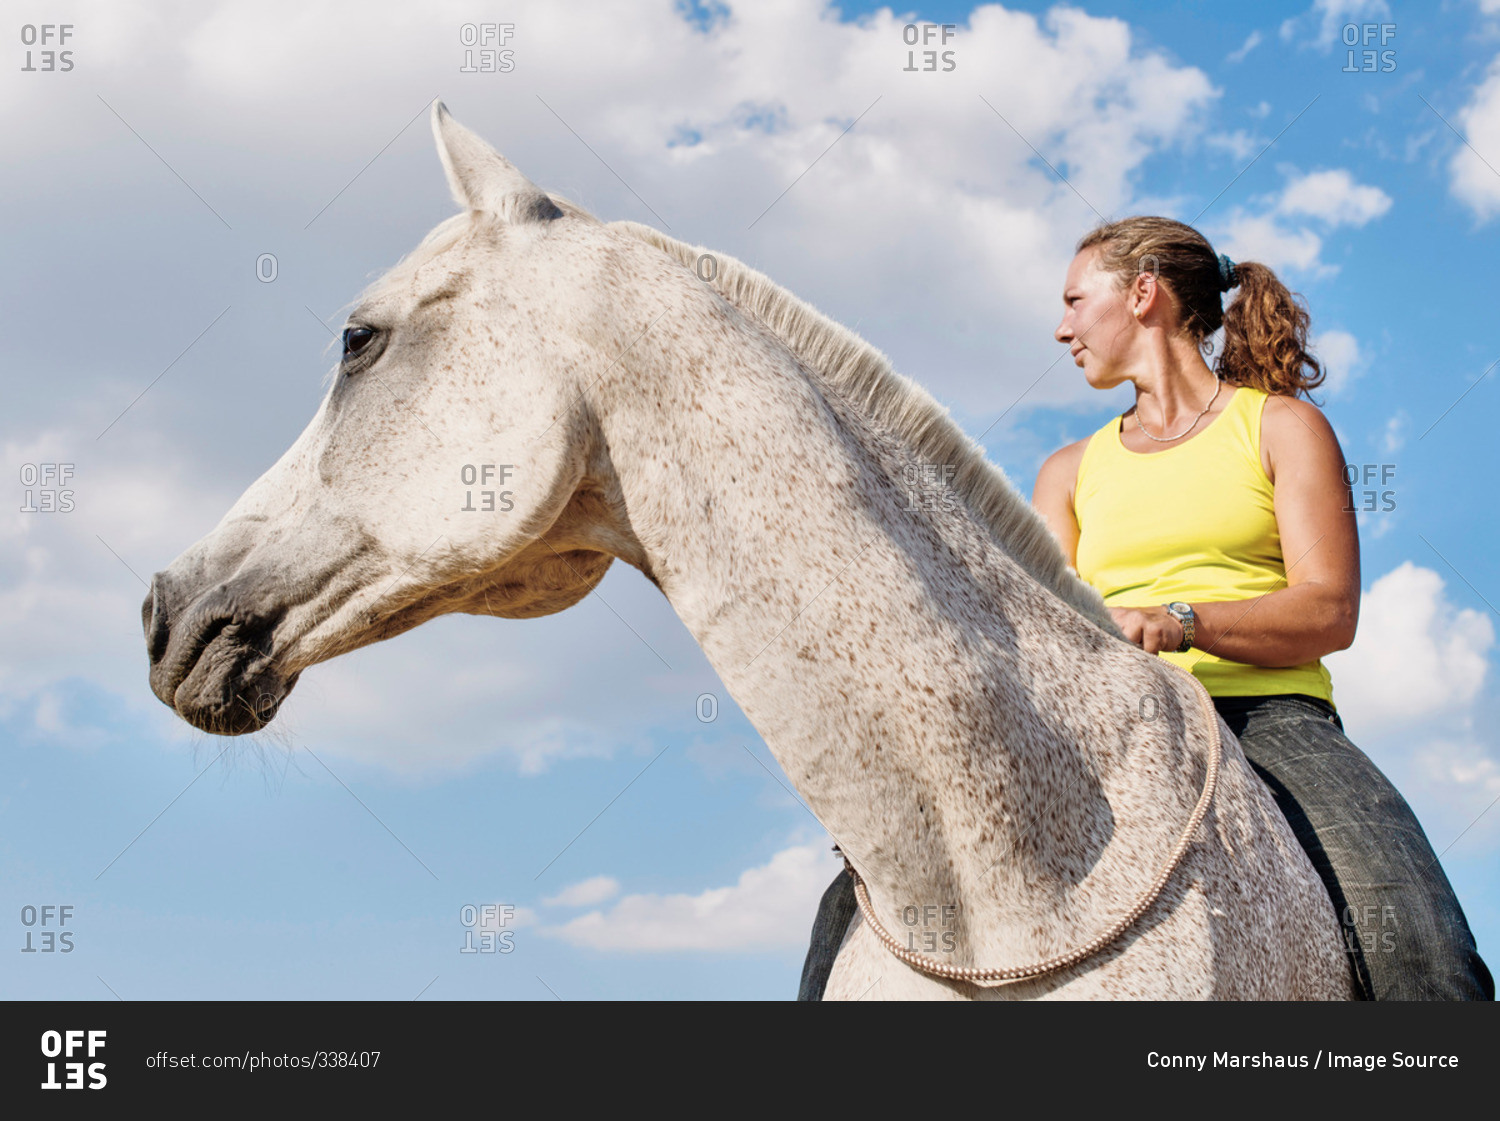 Low angle view of woman riding grey horse bareback against blue sky